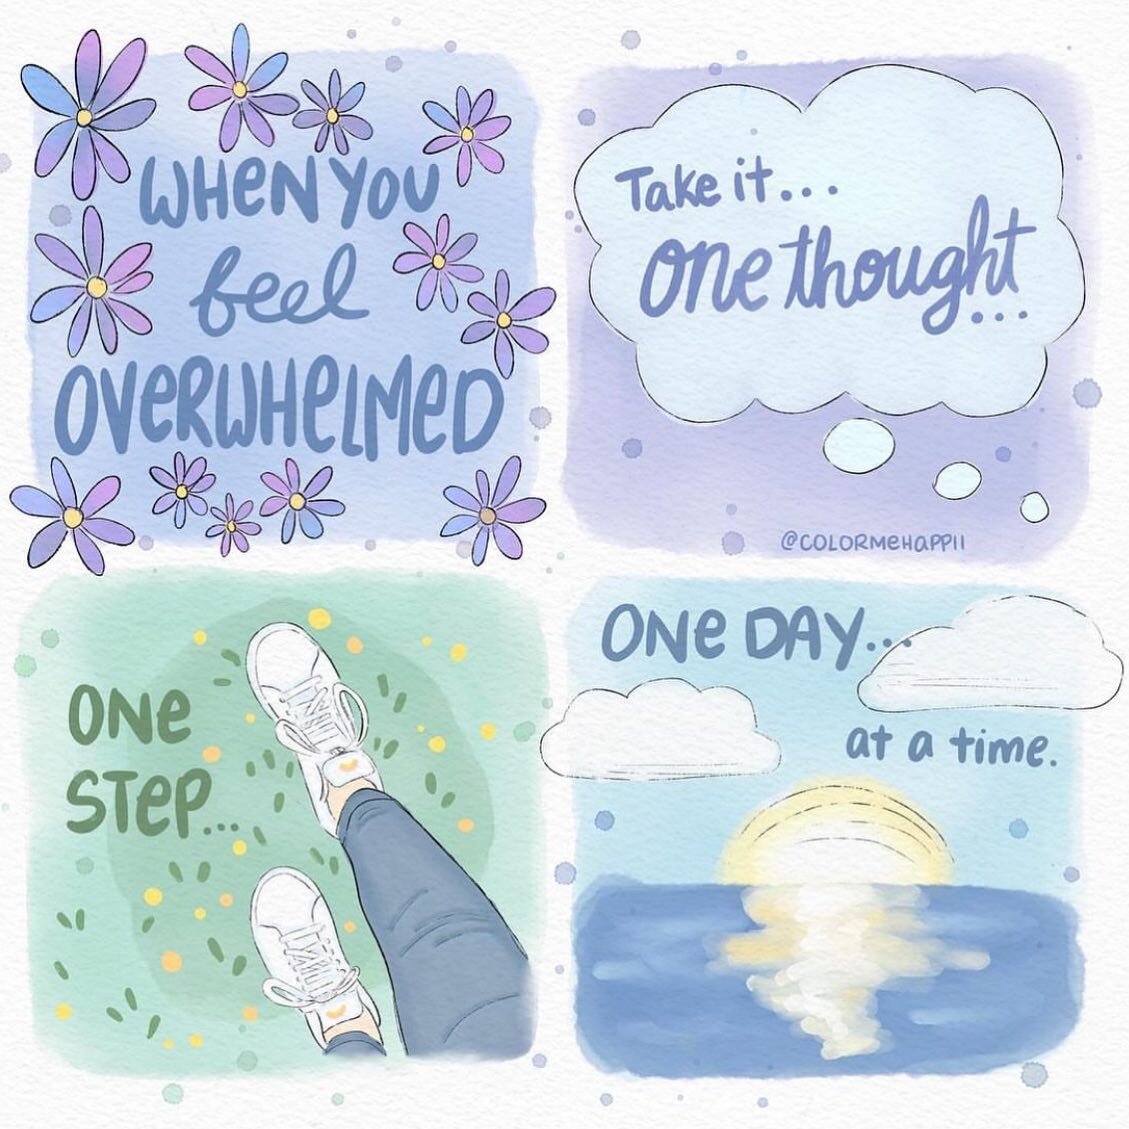 from @colormehappii 

when you feel overwhelmed, take it&hellip;one thought&hellip;one step&hellip;one day&hellip;at a time.